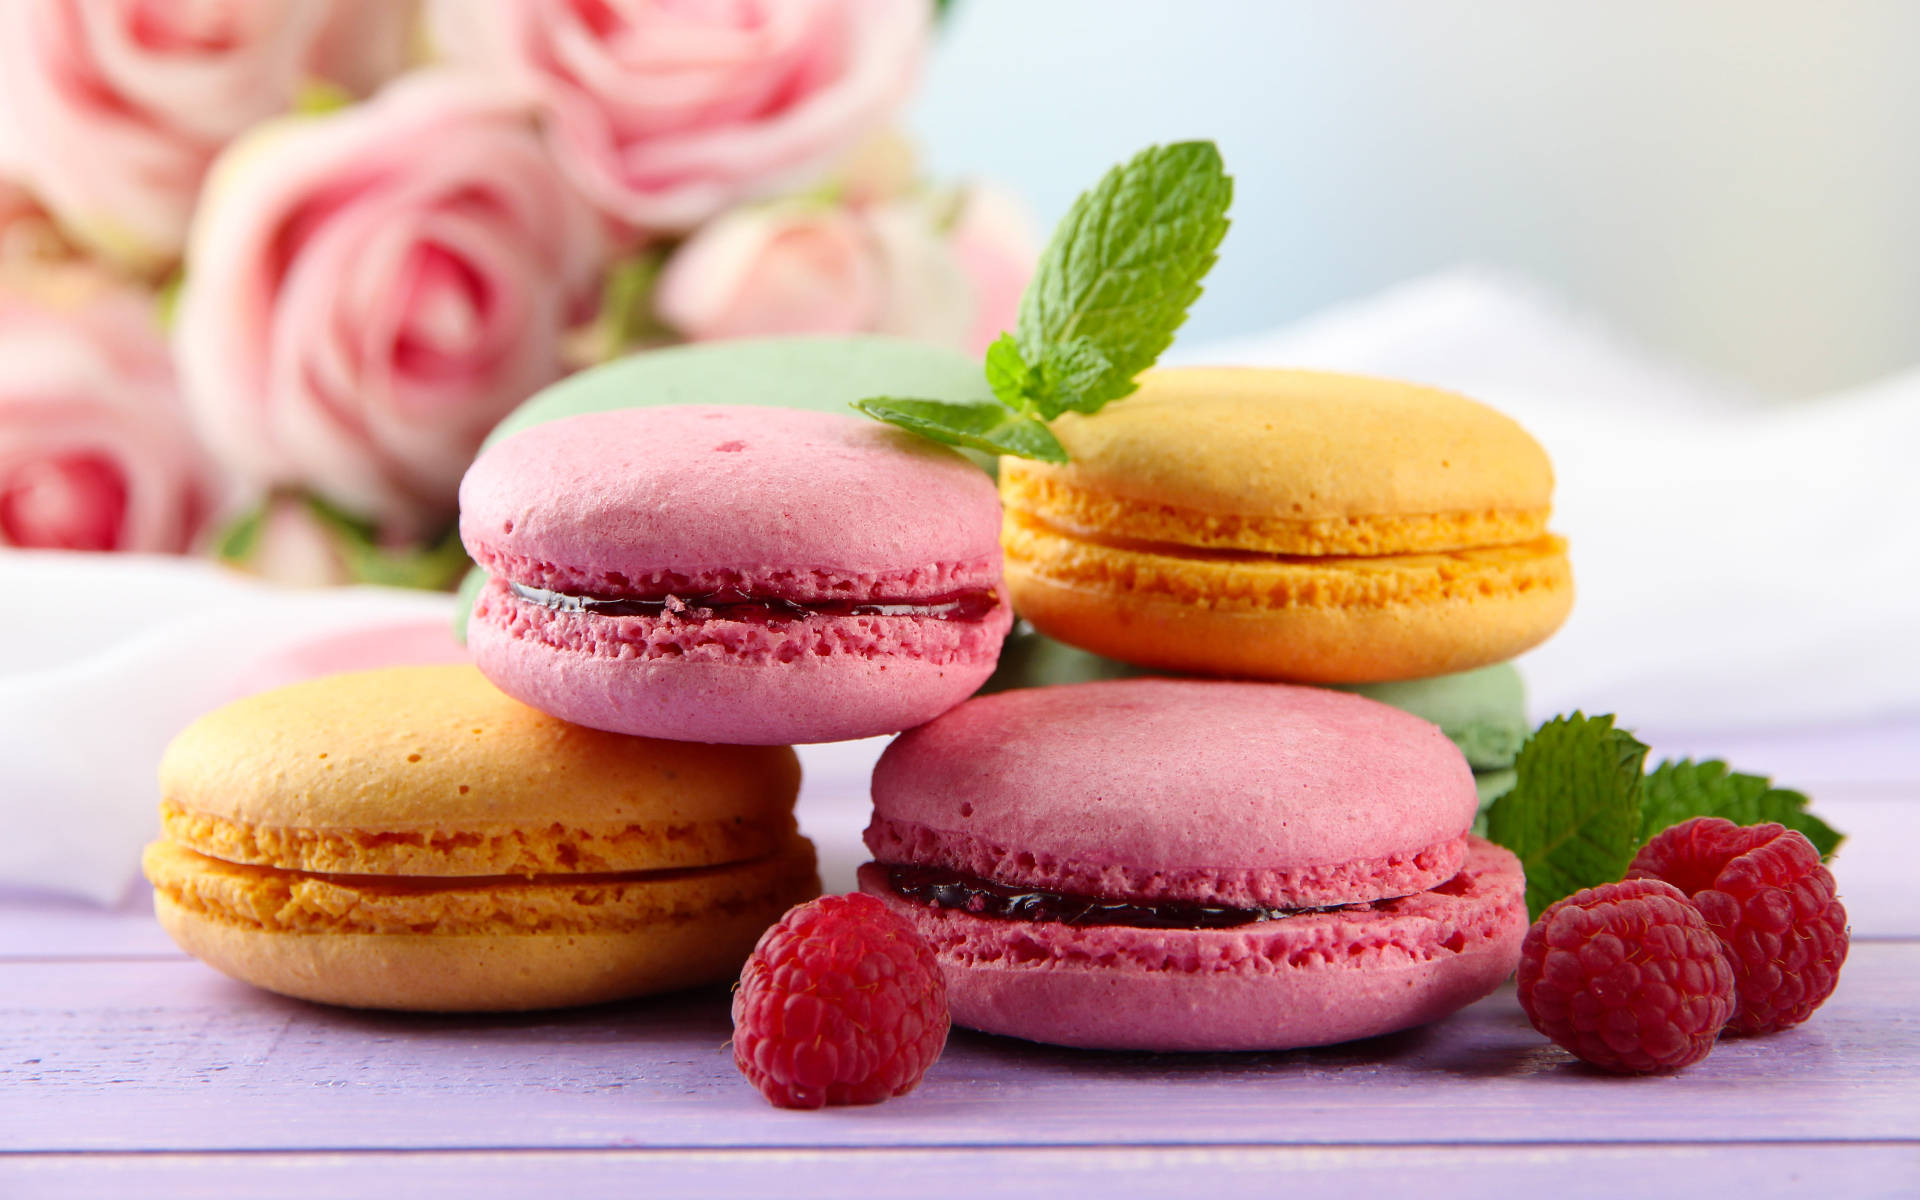 Colorful Macarons And Berries